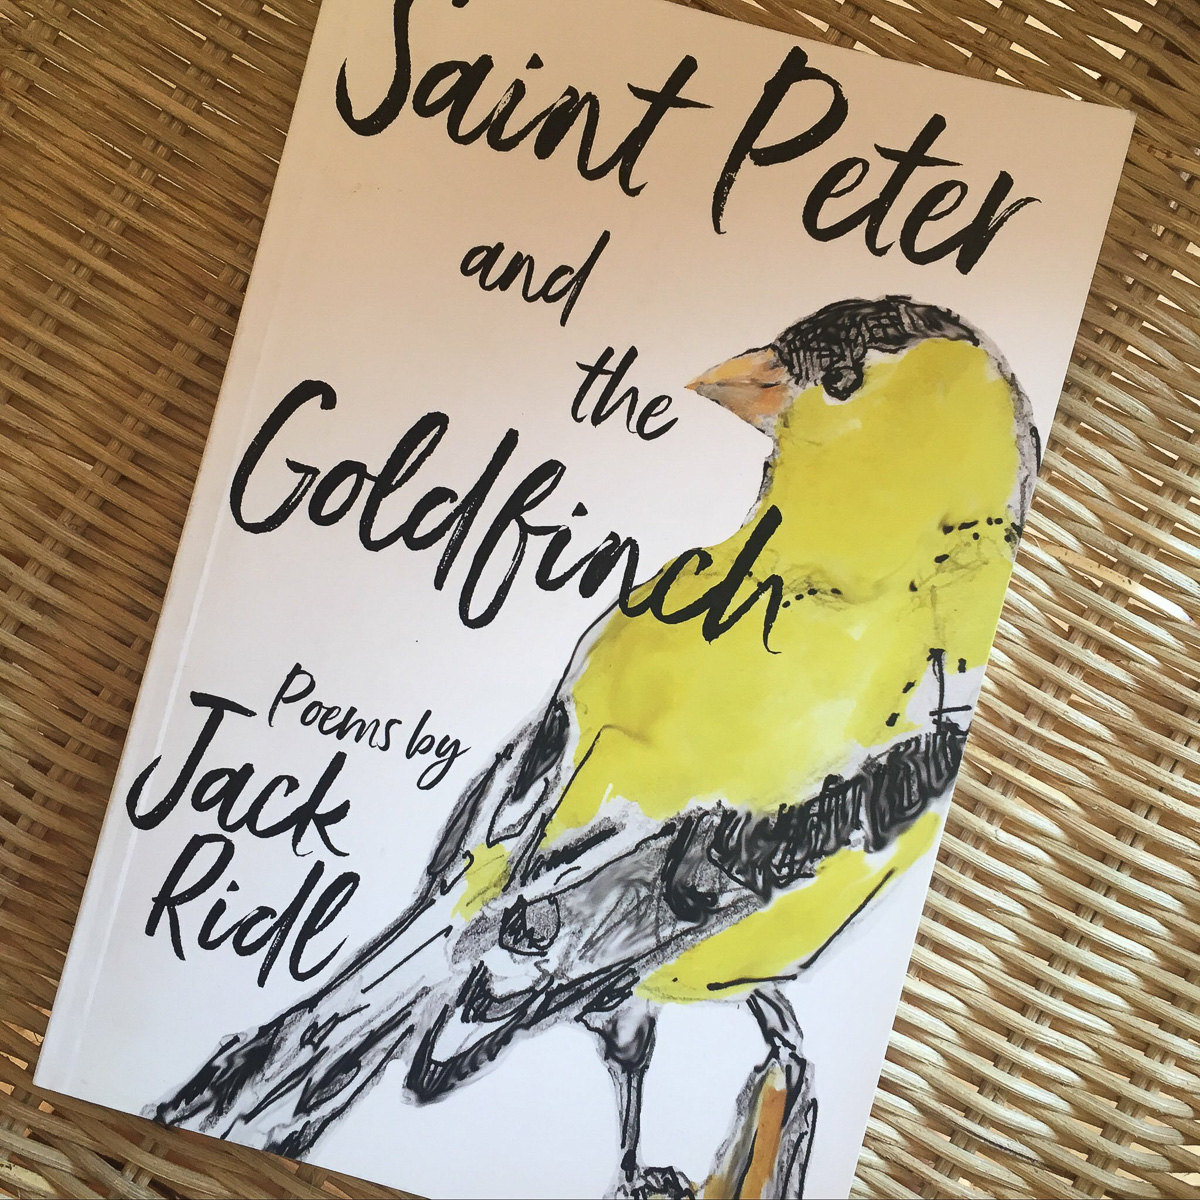 Jack Ridl, Saint Peter and the Goldfinch, Poems, 2019. Published by Wayne State University Press. 